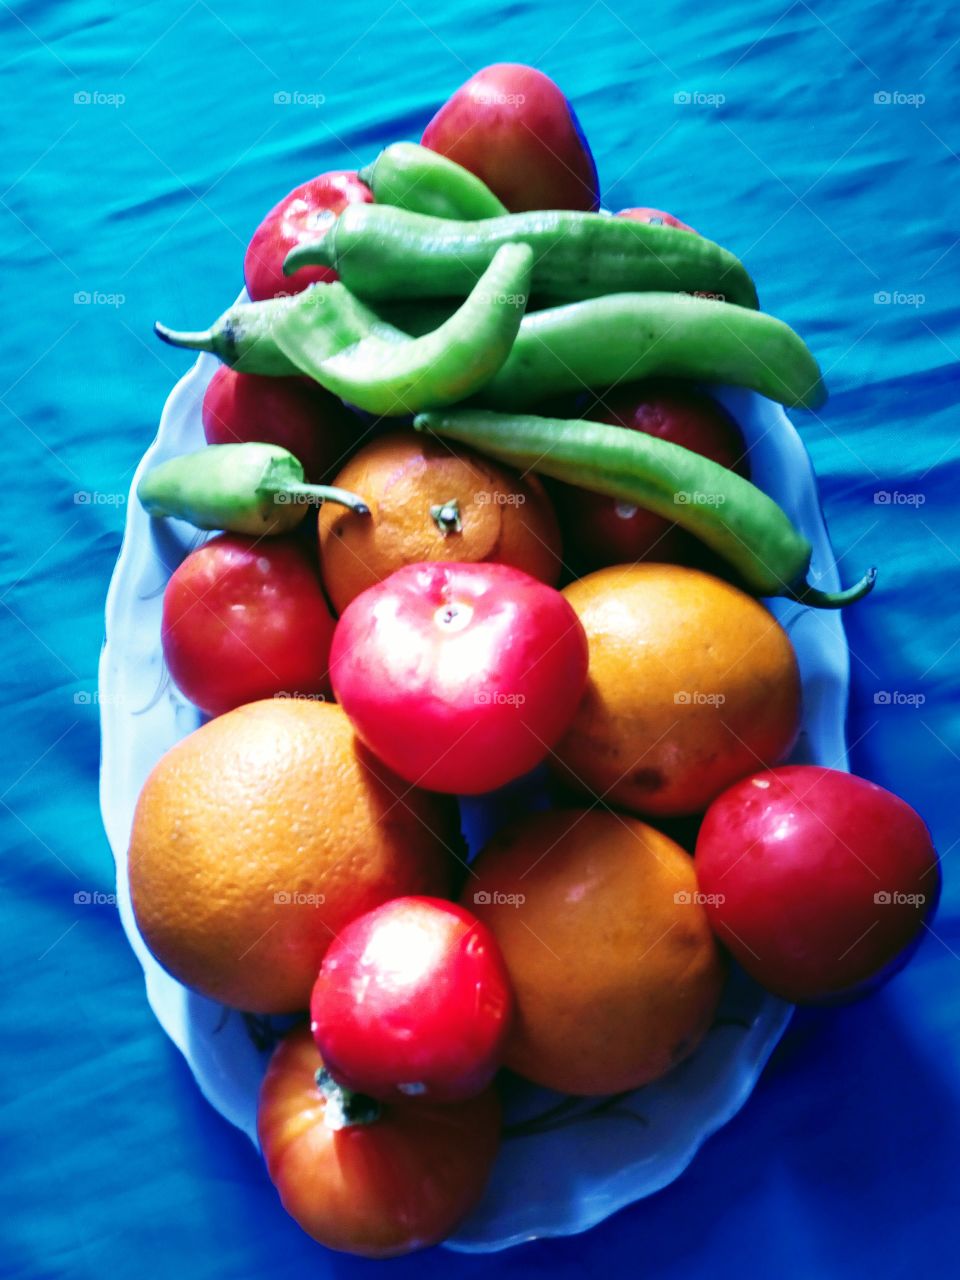 A dish of tomatoes, green peppers and oranges a variety of vegetables and fruits